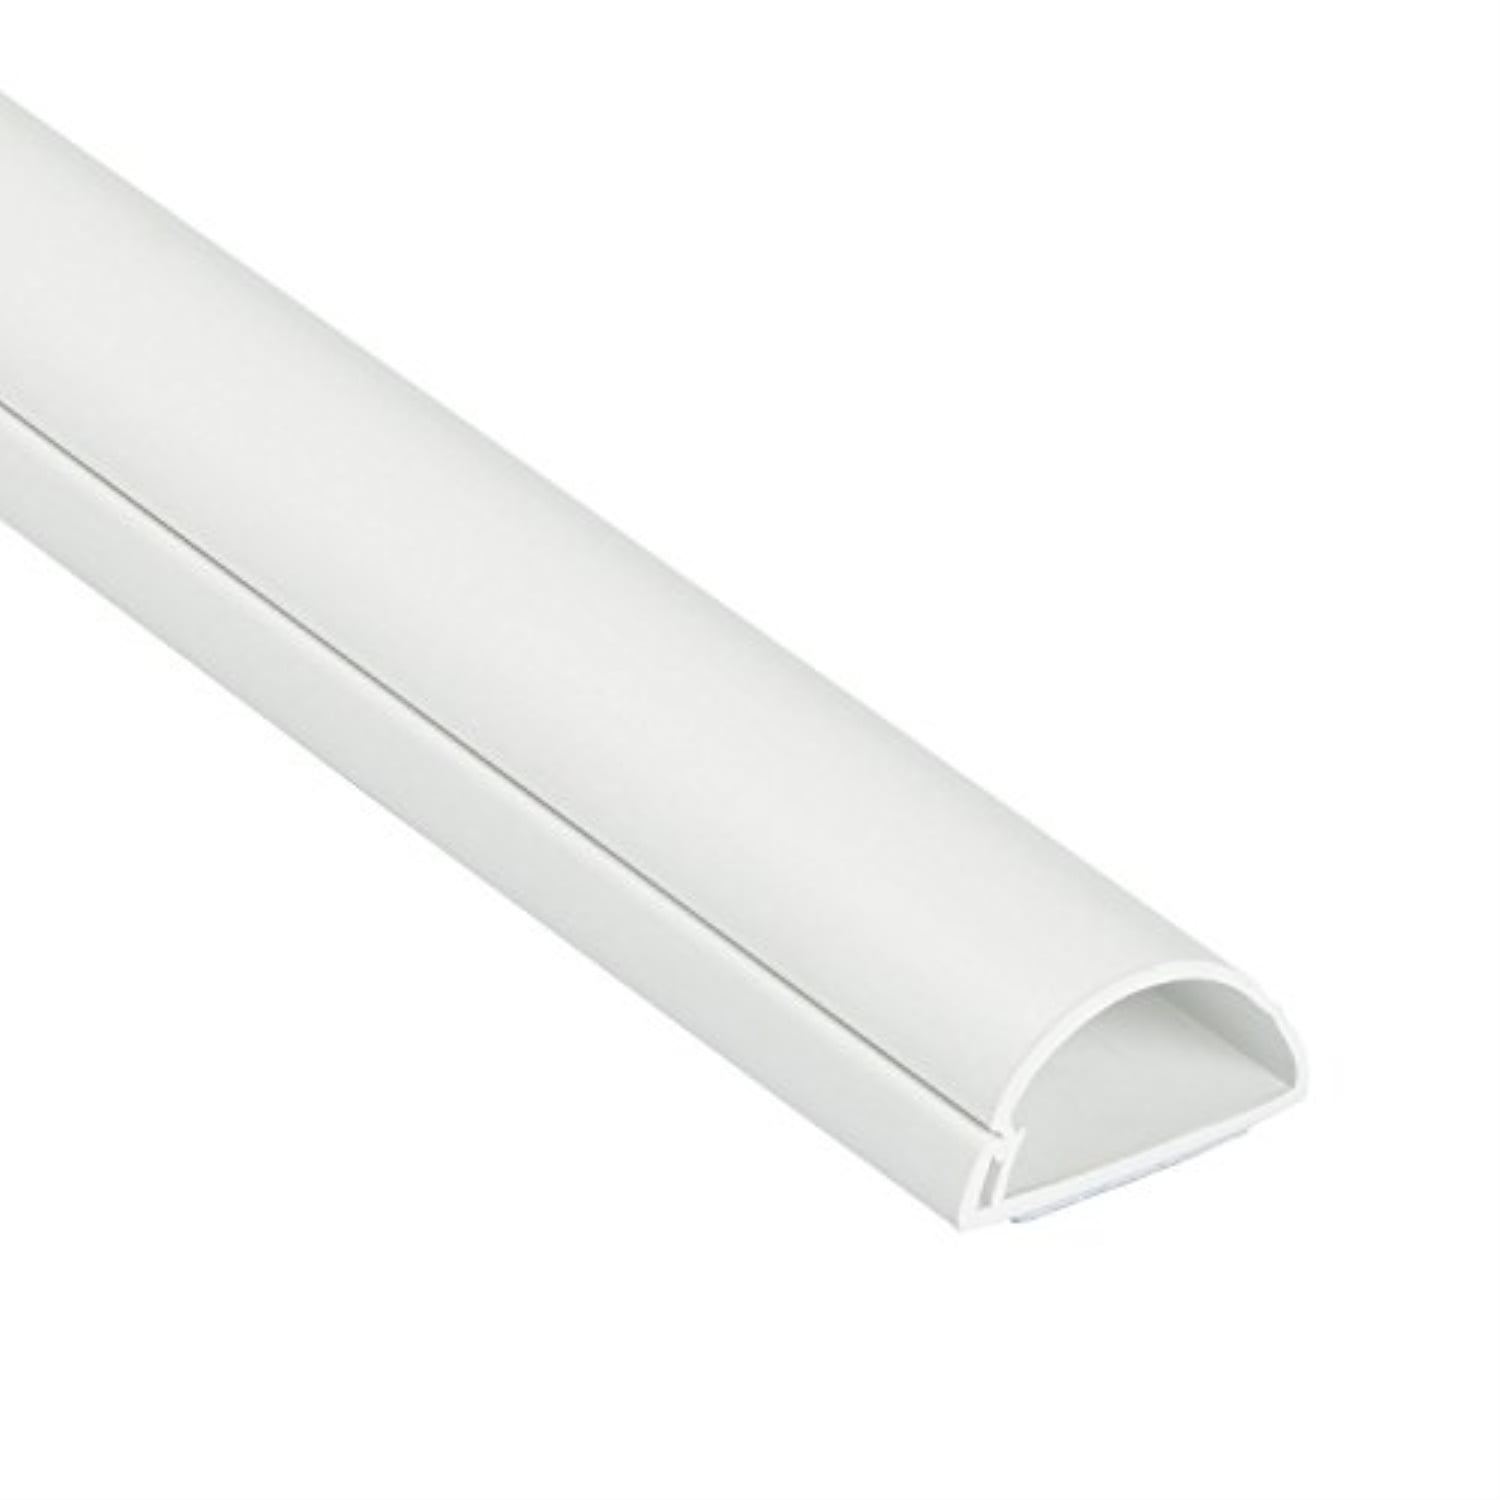 1 M Length-White NEW Cable Cover 1M5025W TV Half Round Conduit 50x25 mm 